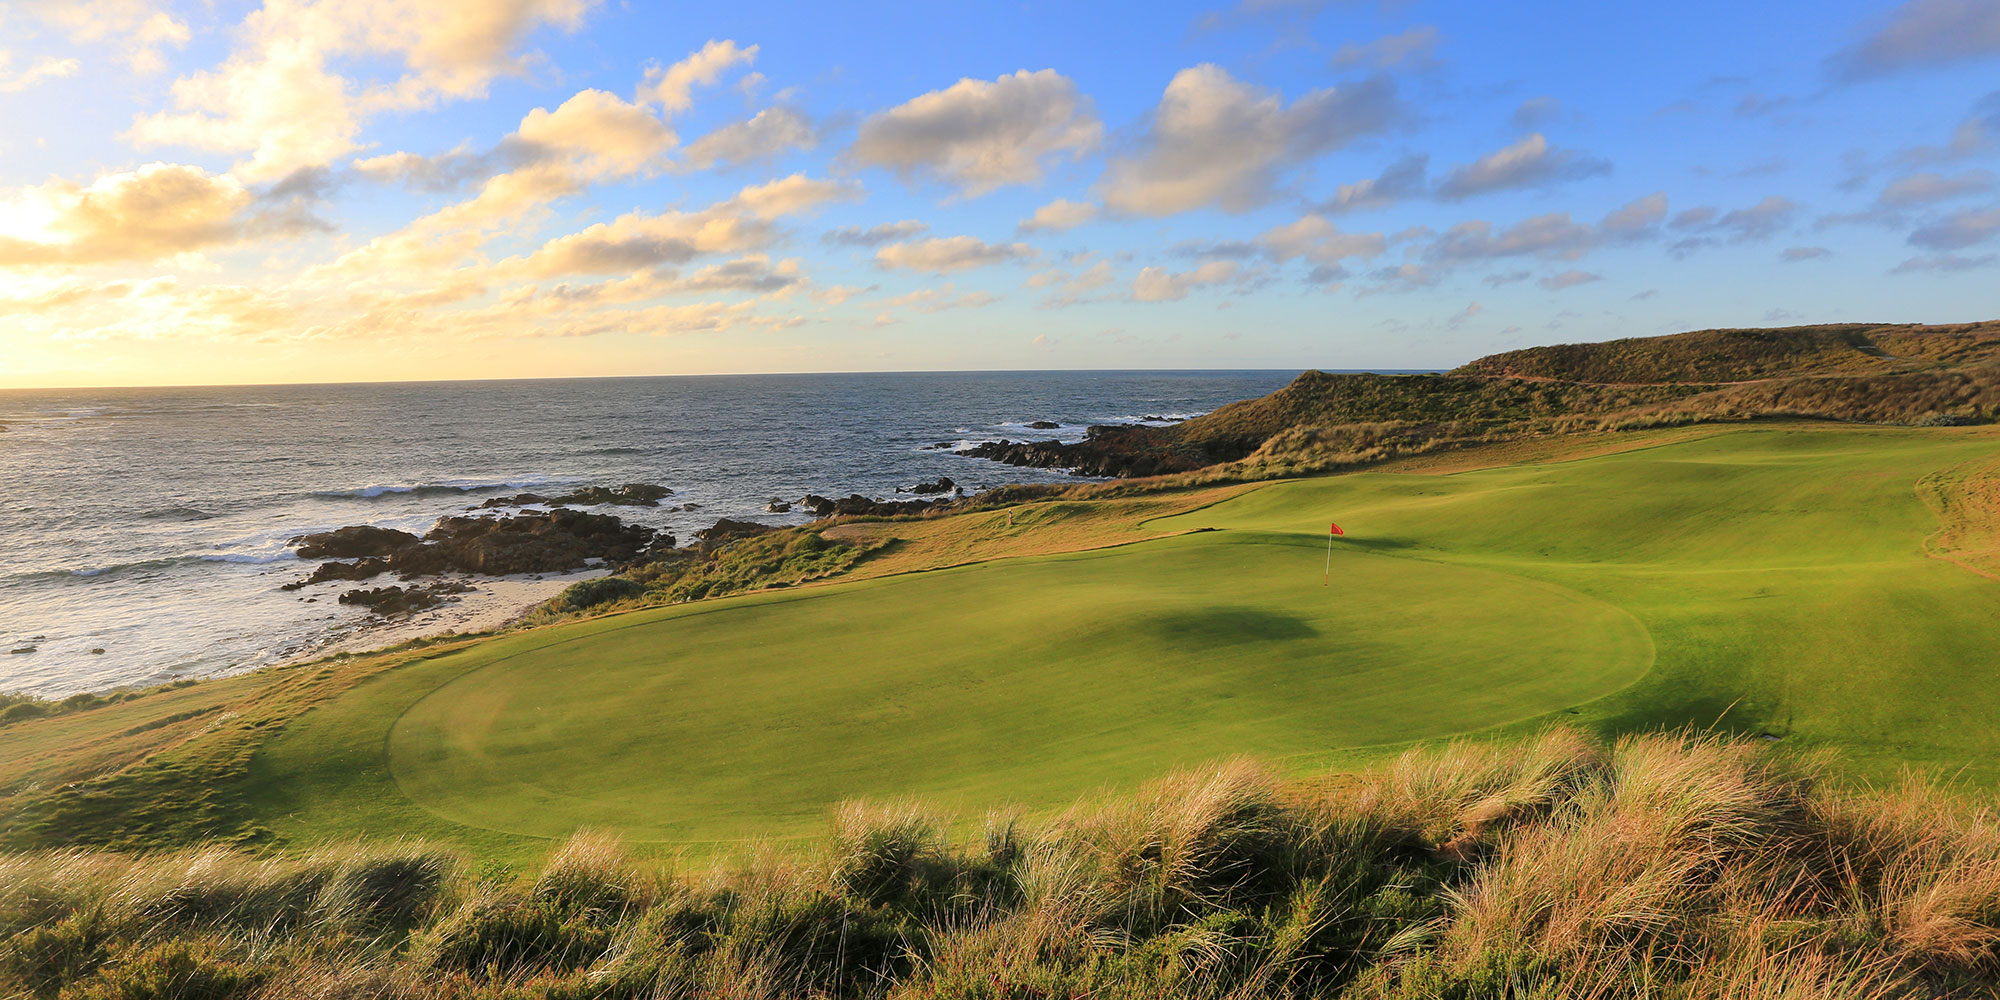 King Island and Barnbougle 'Triangle' Trip (incl. charter flights | 5 days, 4 games